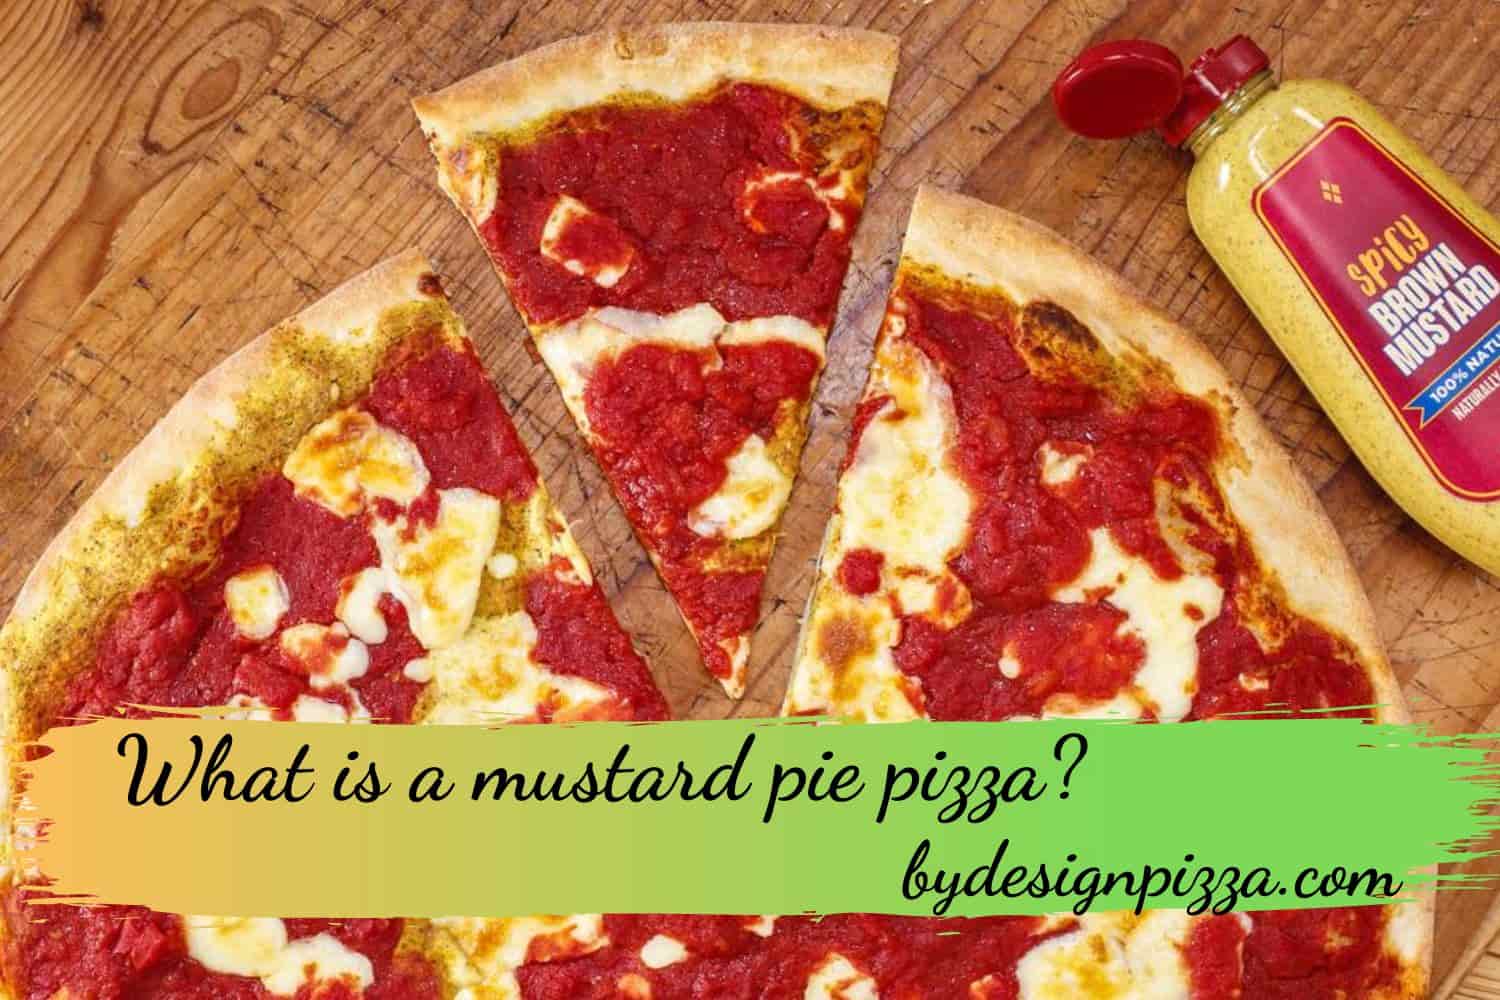 What is a mustard pie pizza?